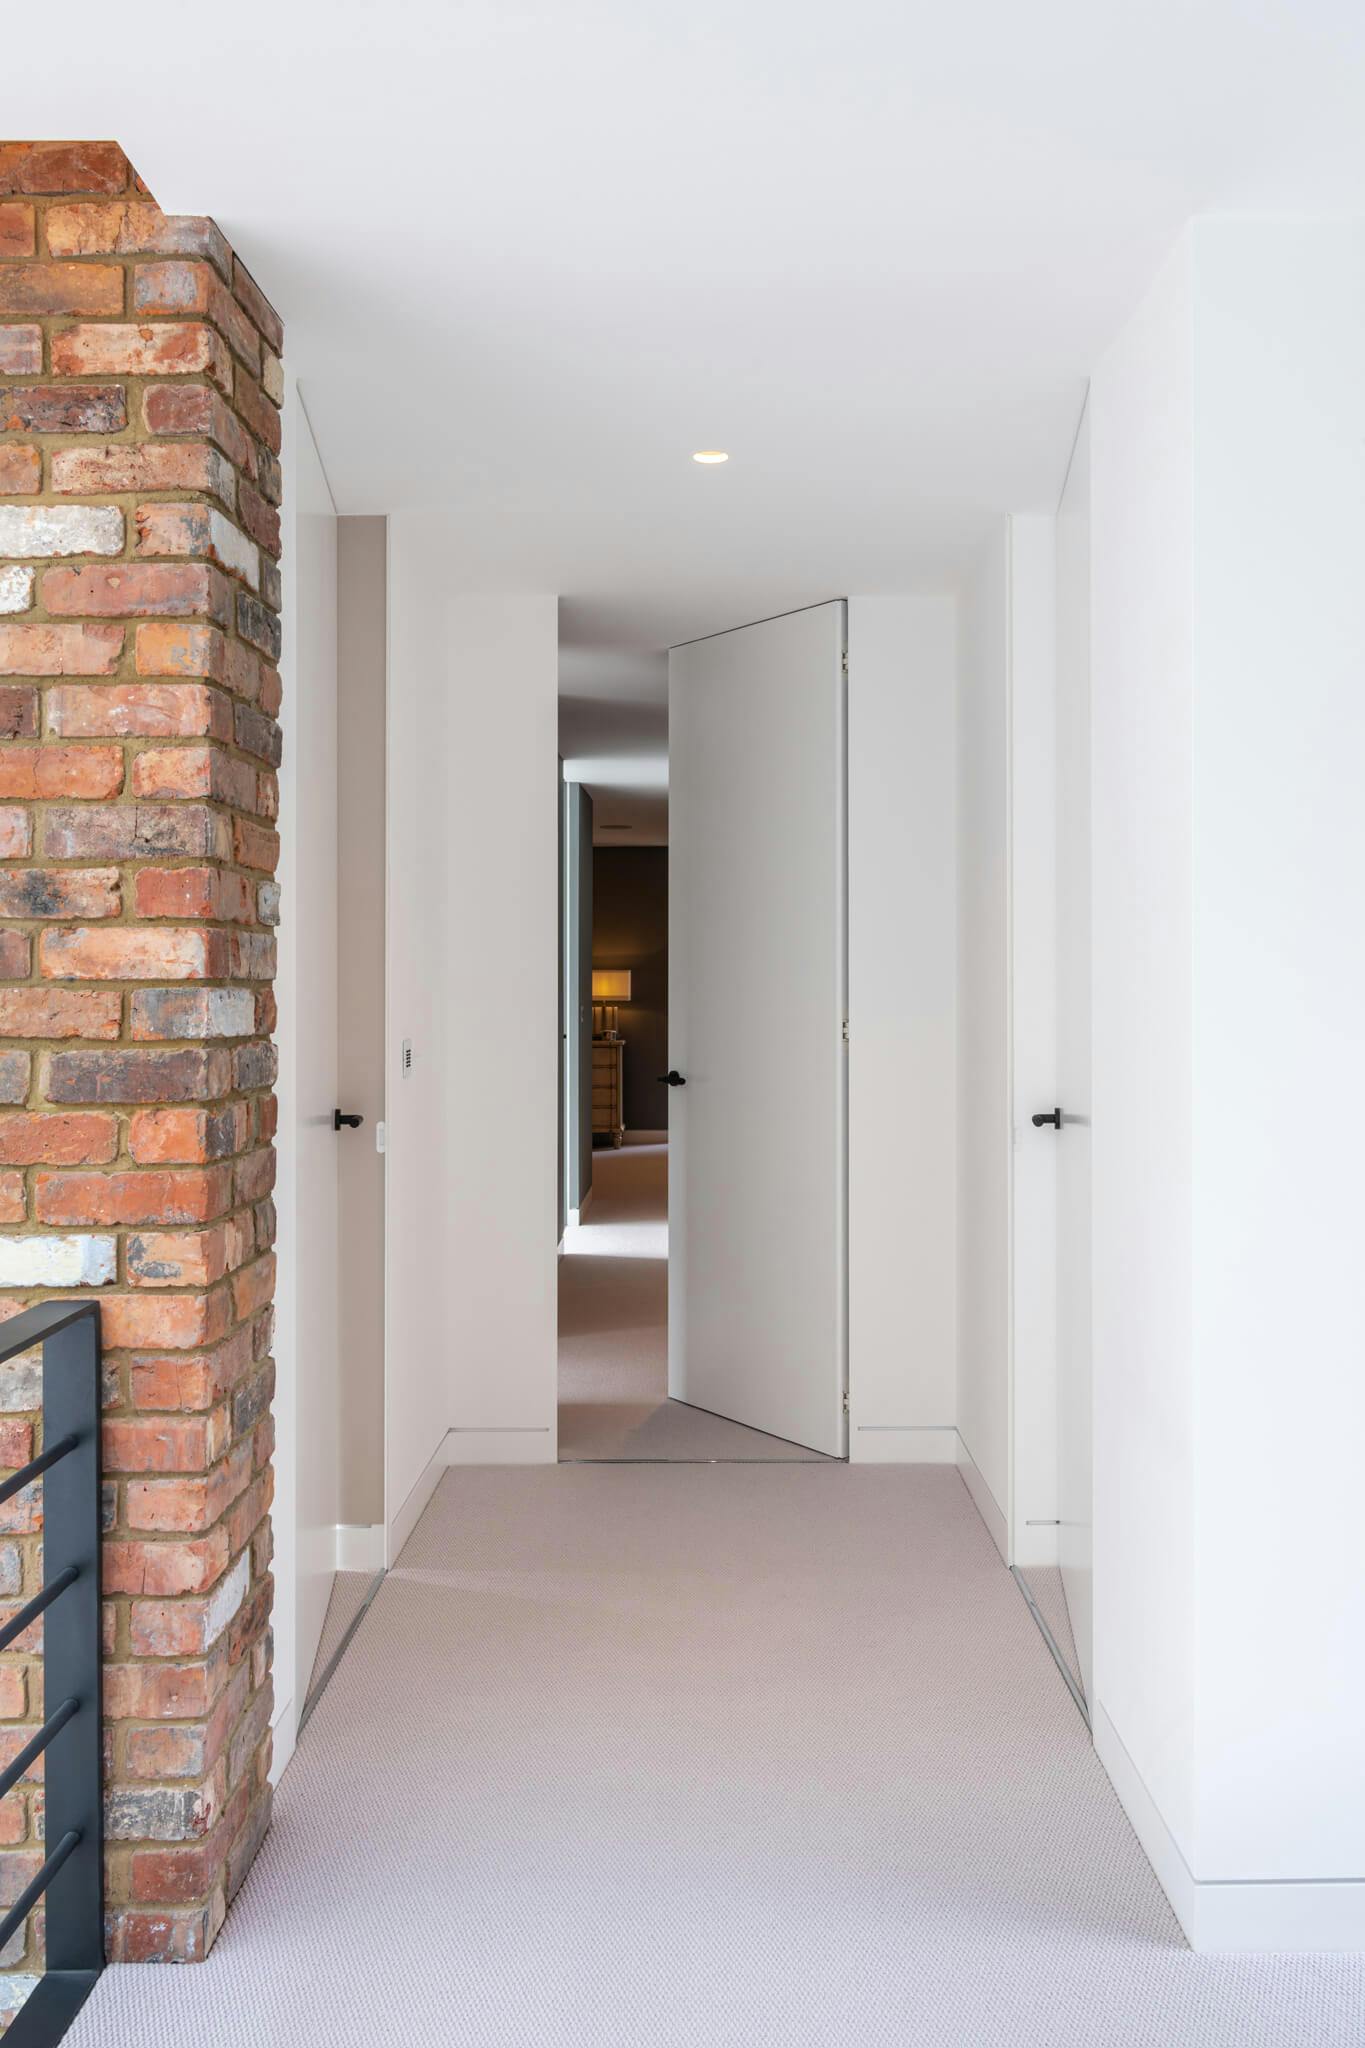 A carpeted corridor with a flush door at the end leading into a bedroom.  Foreground with steel rail, brick feature wall and white walls and doors.